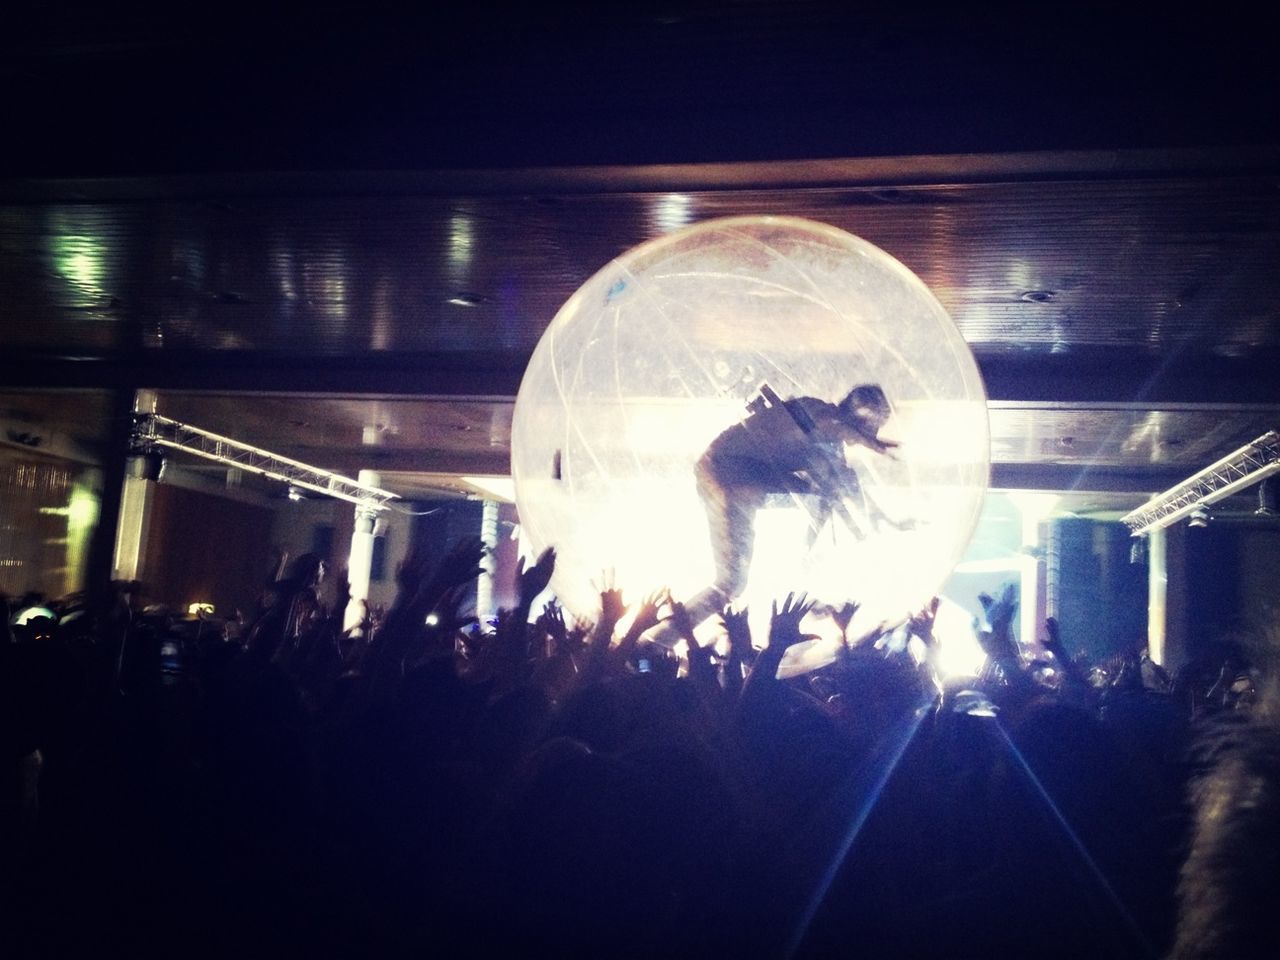 Woman in transparent ball along people at an event